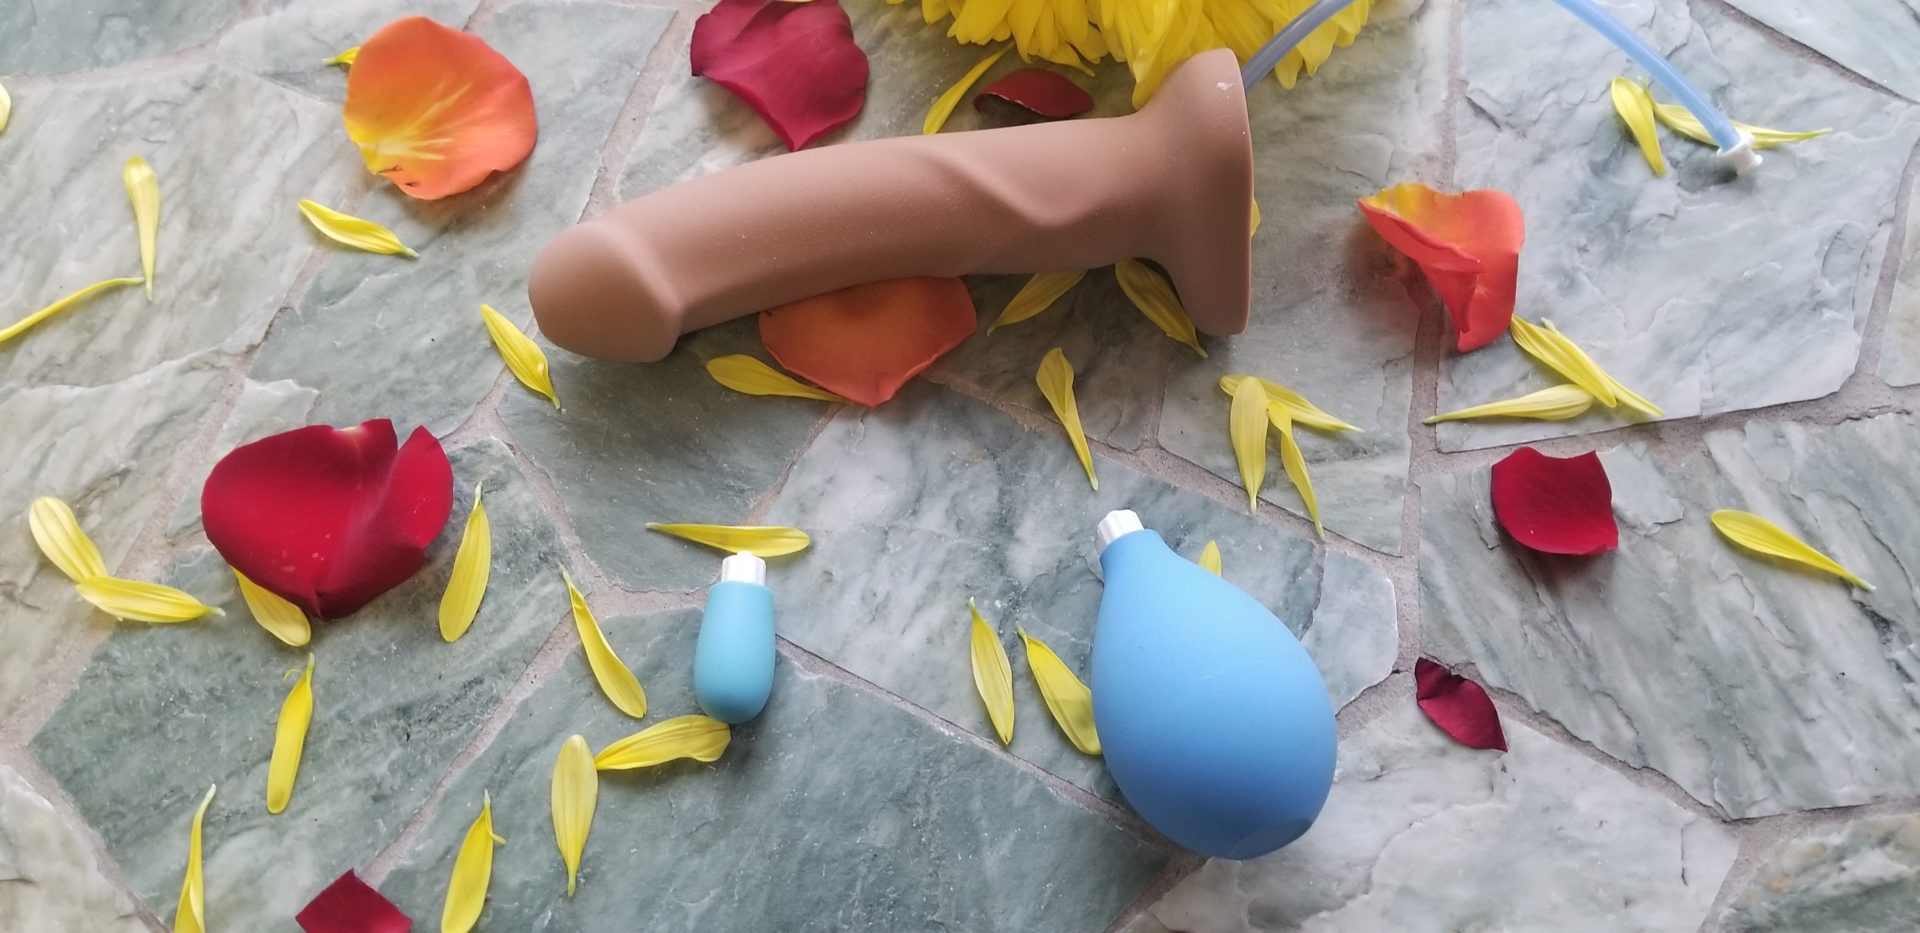 The 7 Best Squirting Dildos Compared (And How To Use Them), A Guide To Getting Drenched pic